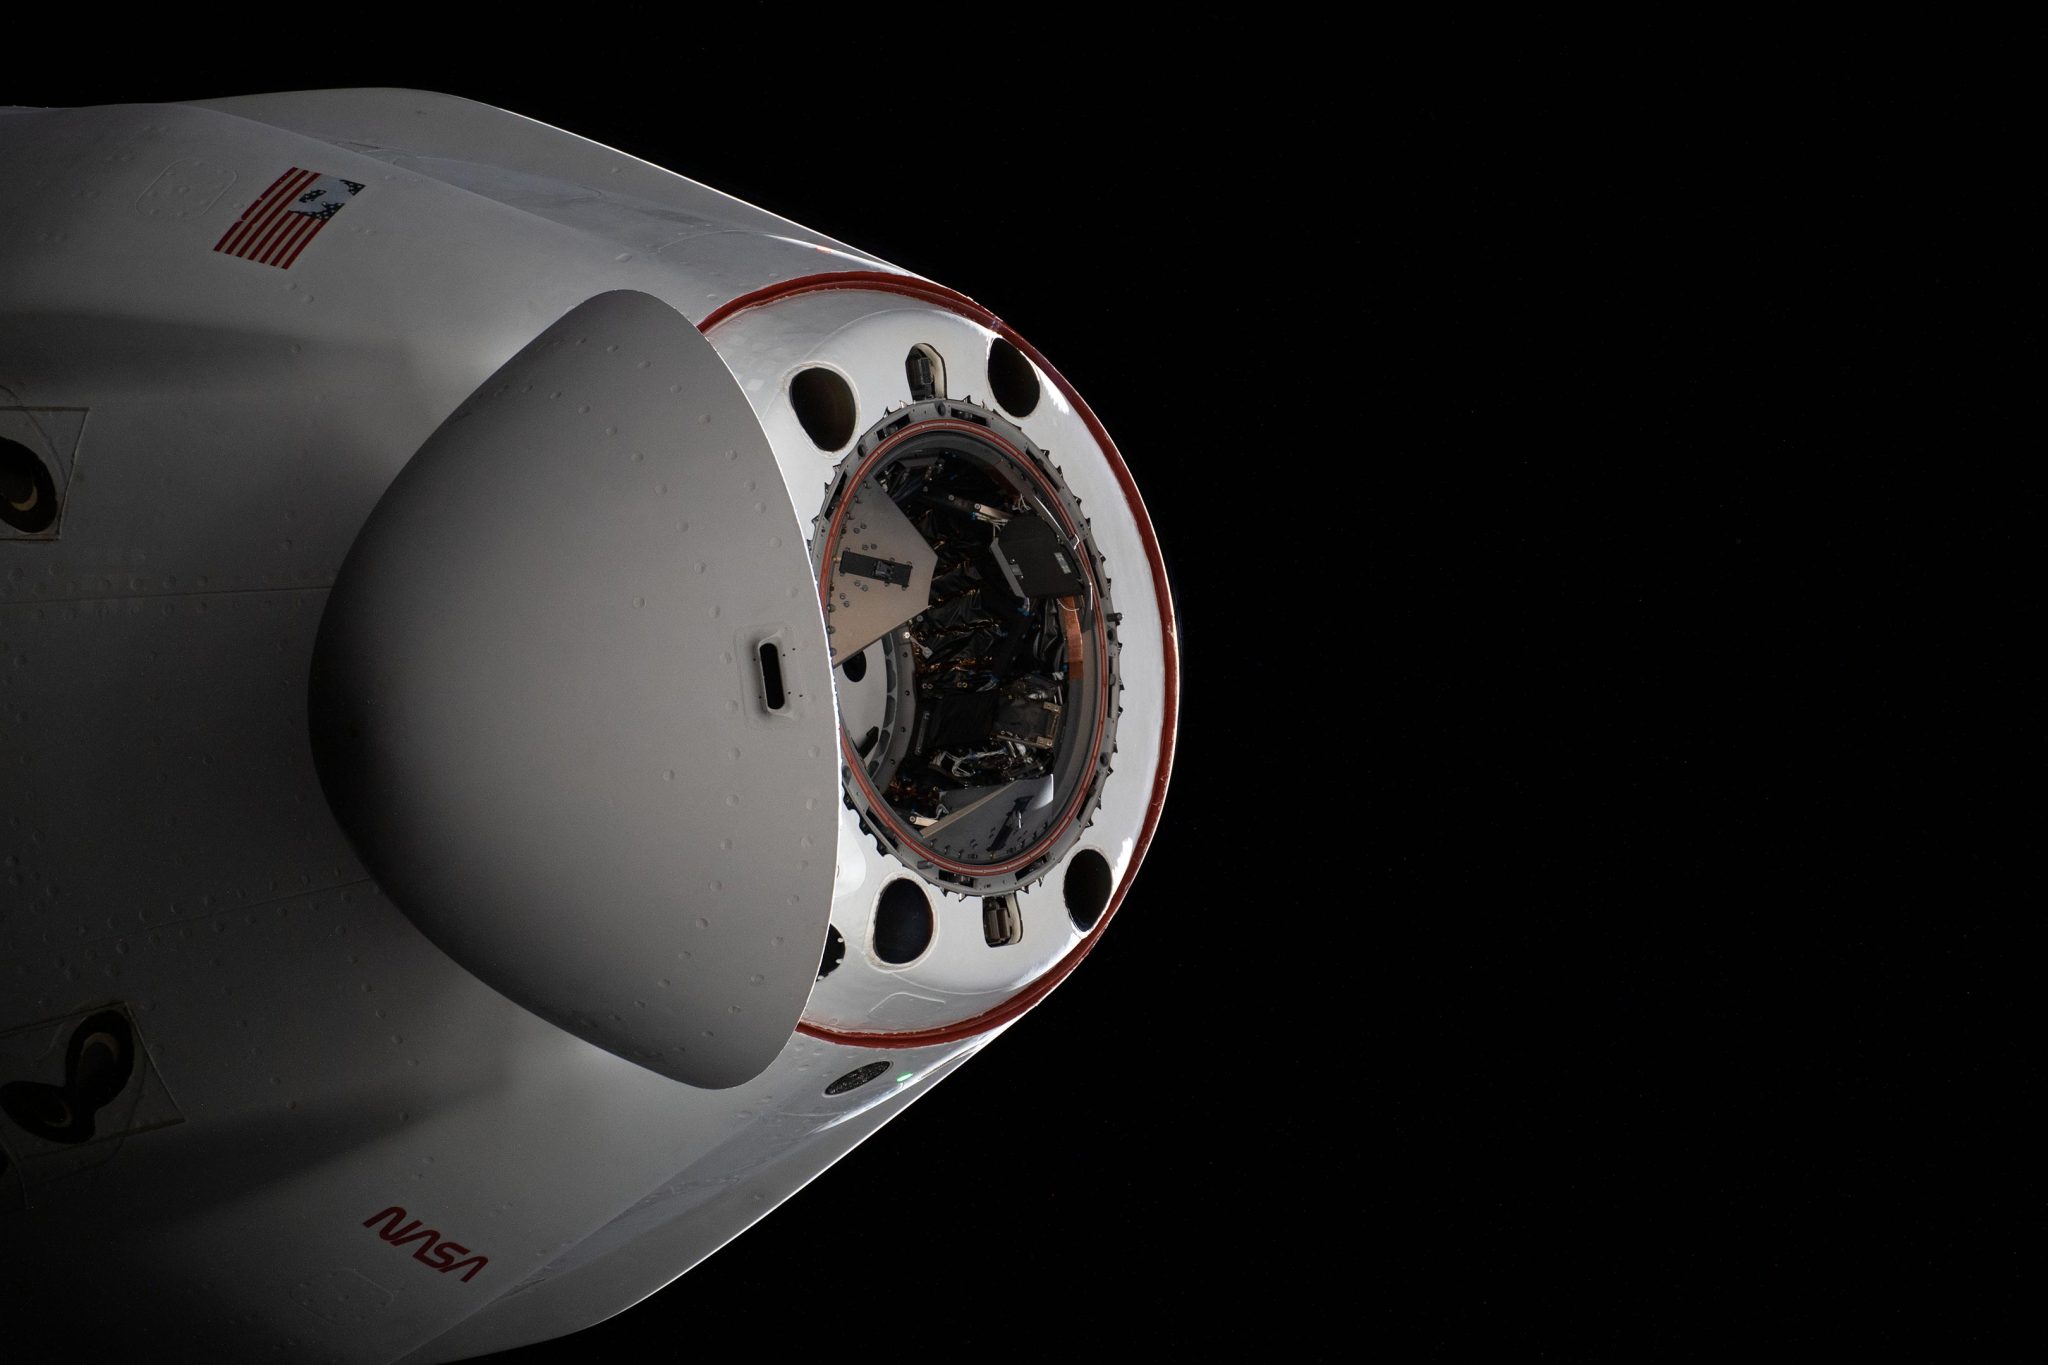 SpaceX Cargo Dragon supply ship with open nose cone